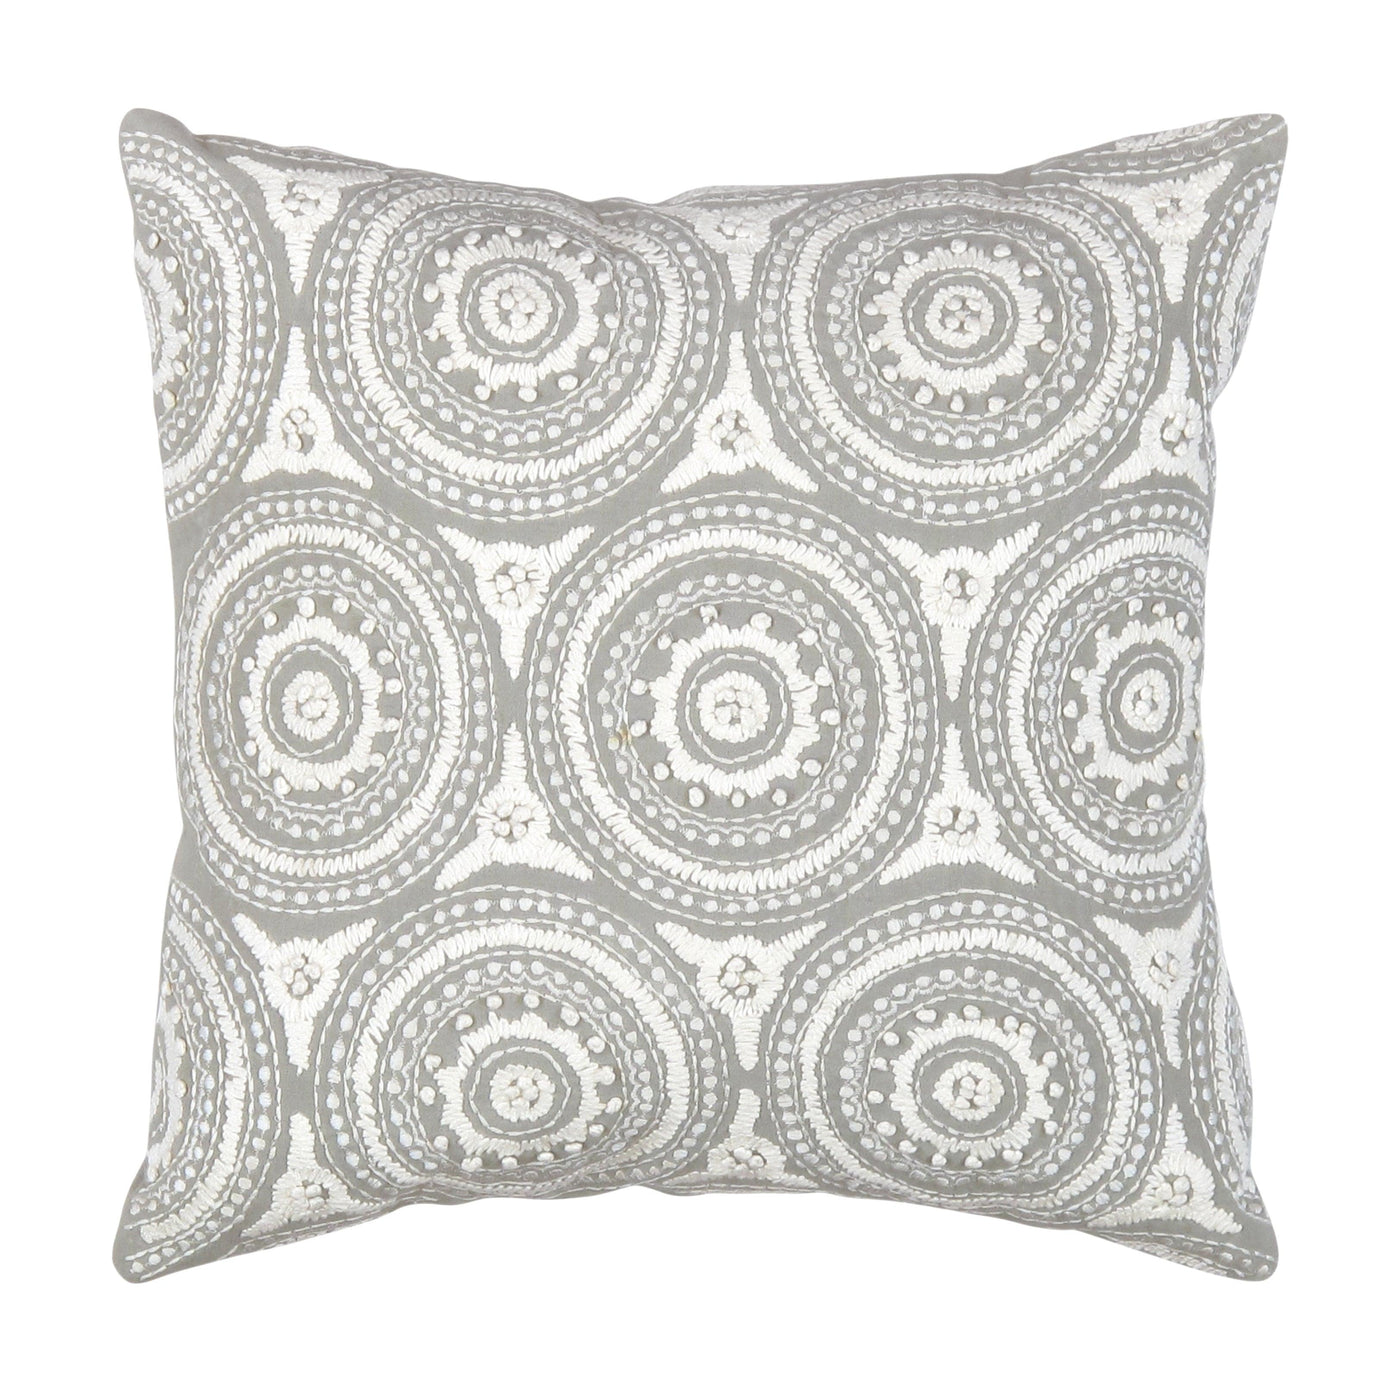 Canvello Naples Embroidered Pillow, Grey/Ivory